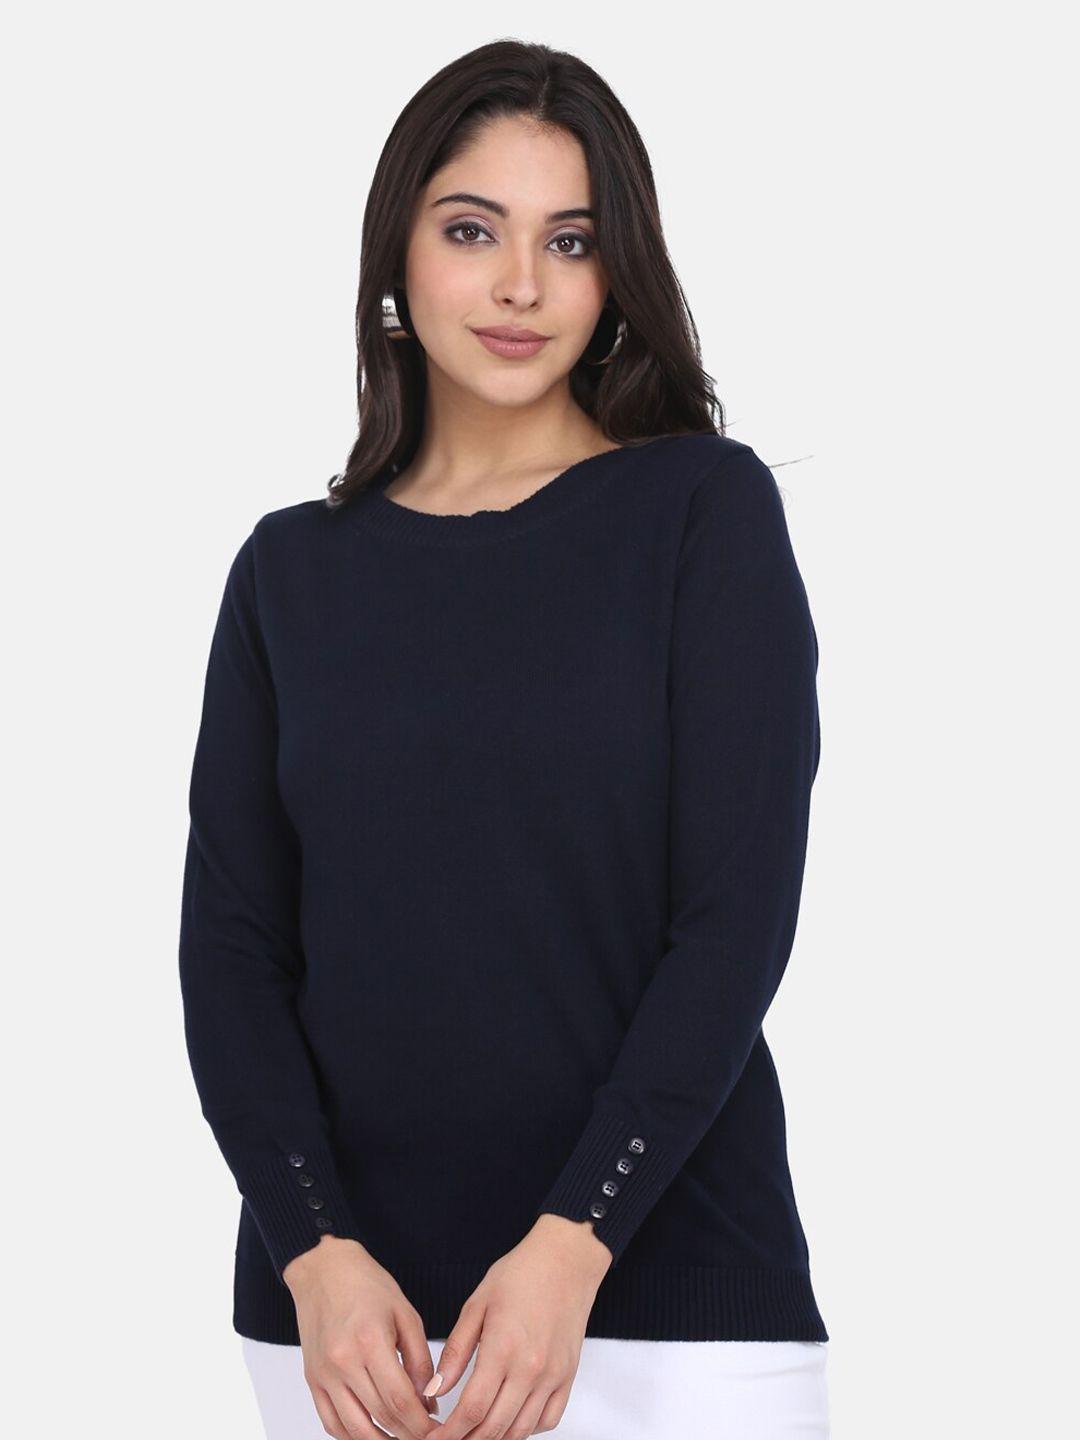 powersutra-women-navy-blue-solid-pullover